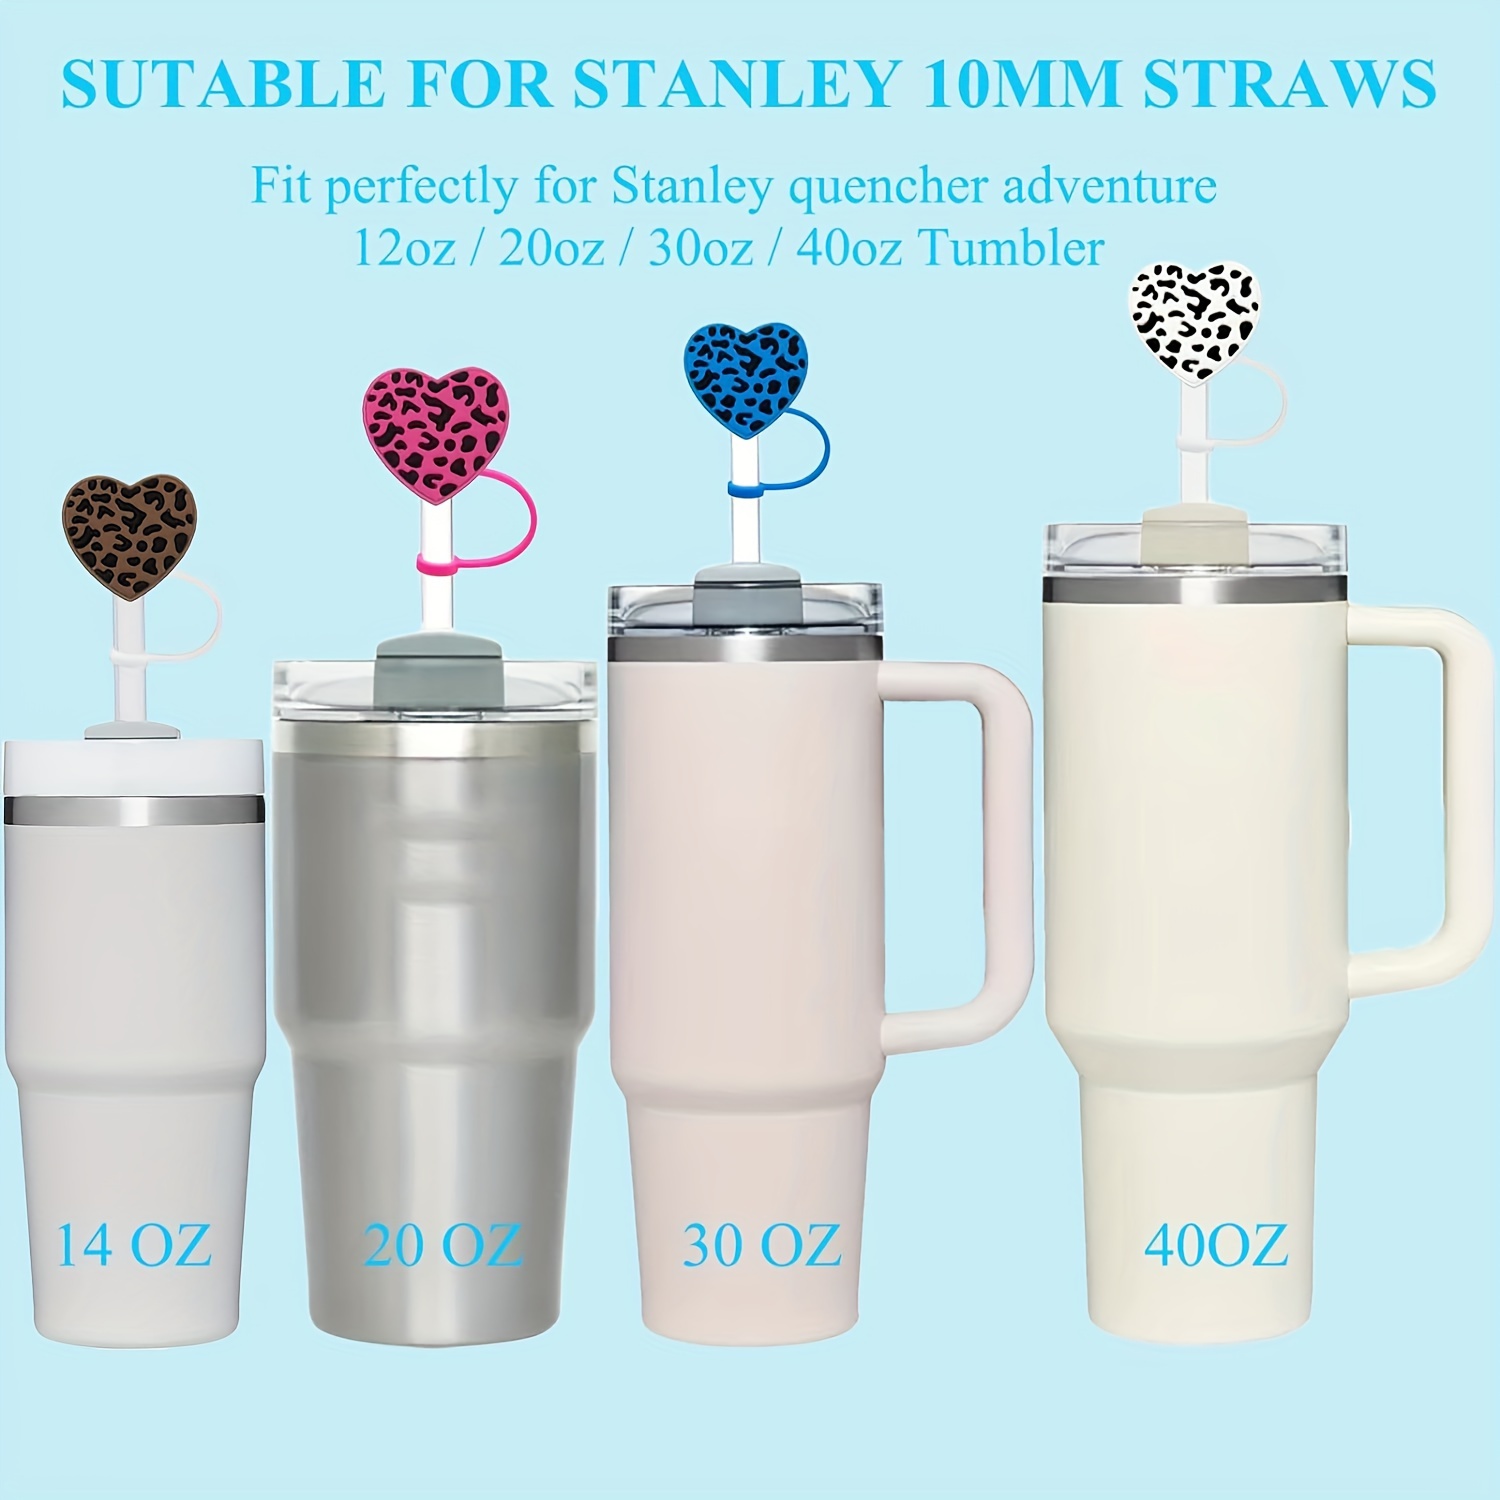 10mm Straw Cover, 6pcs Straw Covers Cap for Stanley Cup 40 oz 30 oz Food  Grade Silicone Cute Large Cloud Flower Straw Topper Tips Cover Protector